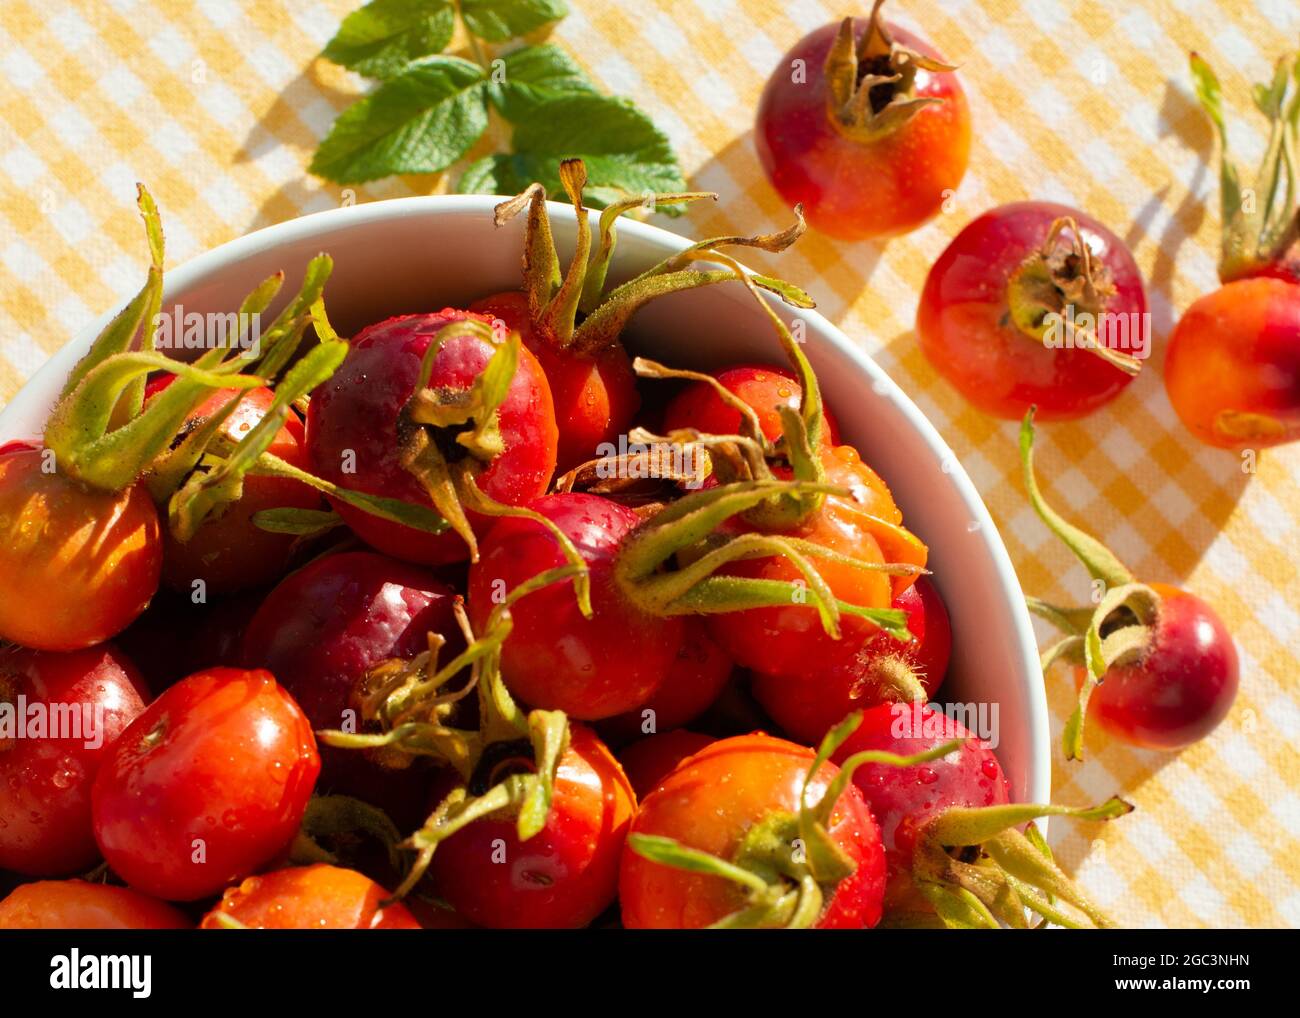 Fruits wild Rose hips of Beach Rose (Rosa rugosa) in a bowl. Close up. Top view. Stock Photo